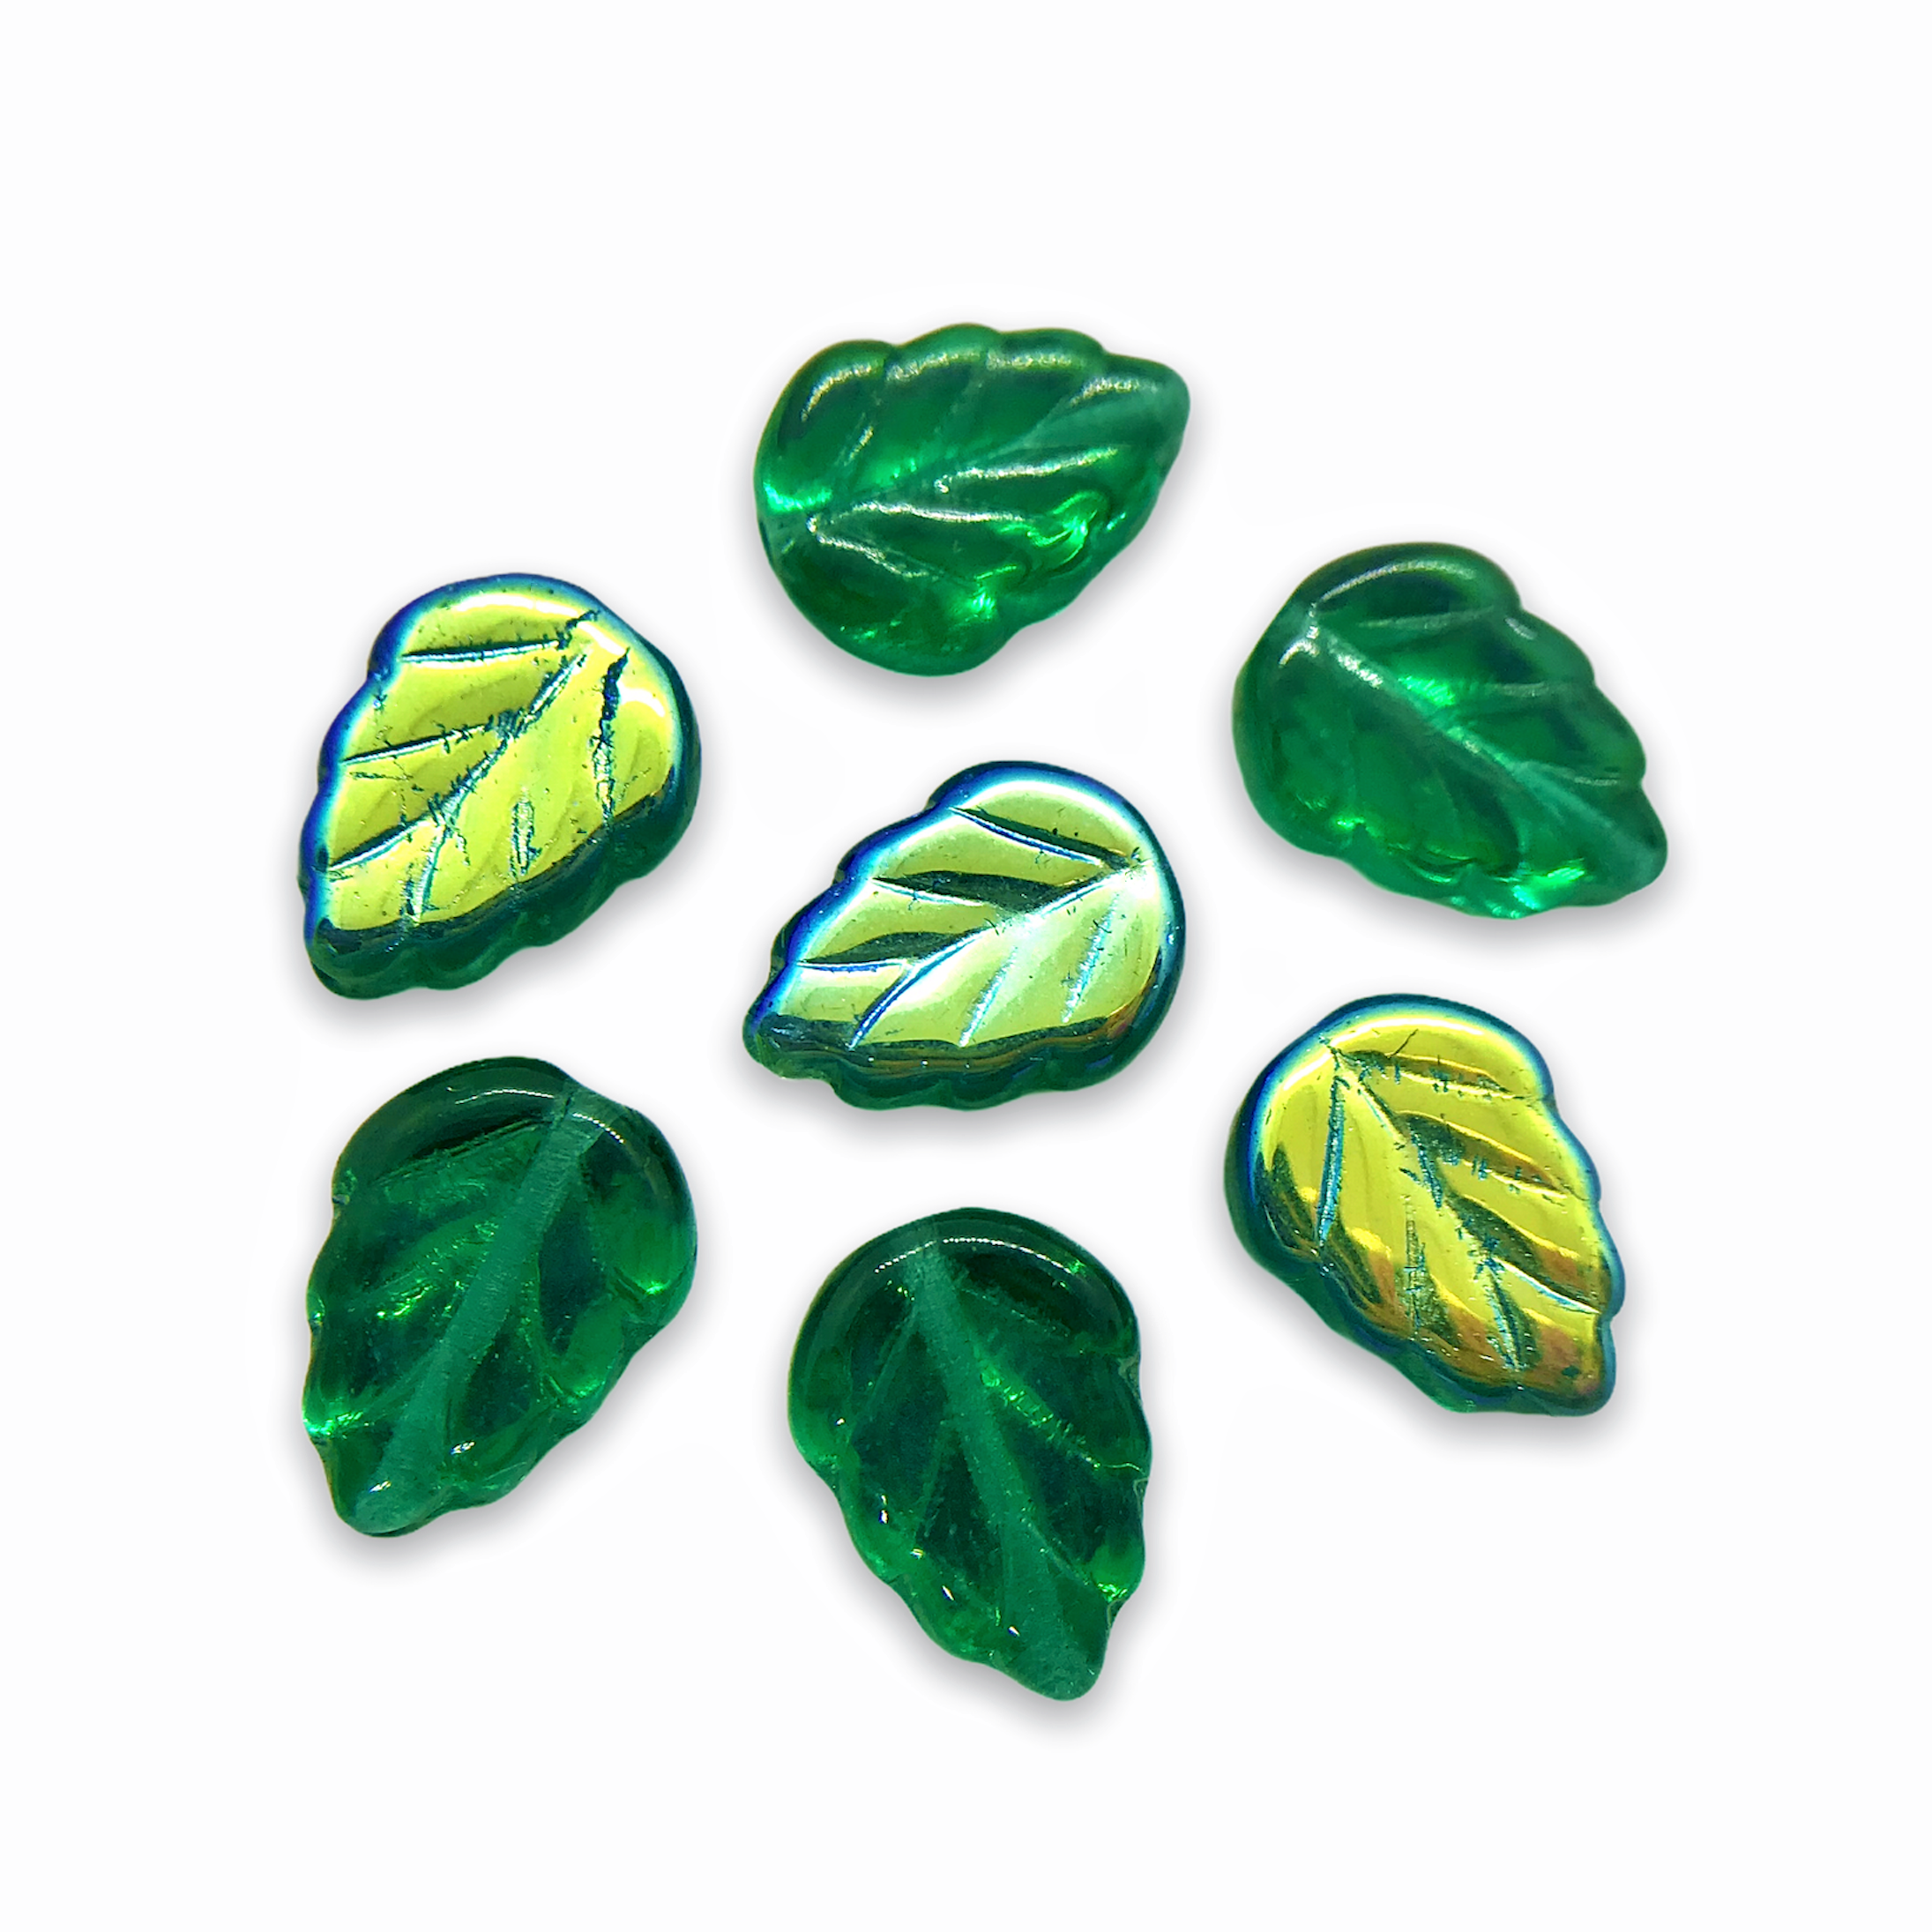 Leaf Beads 50 Pk Translucent Acrylic Green Tree Leaves Bead for